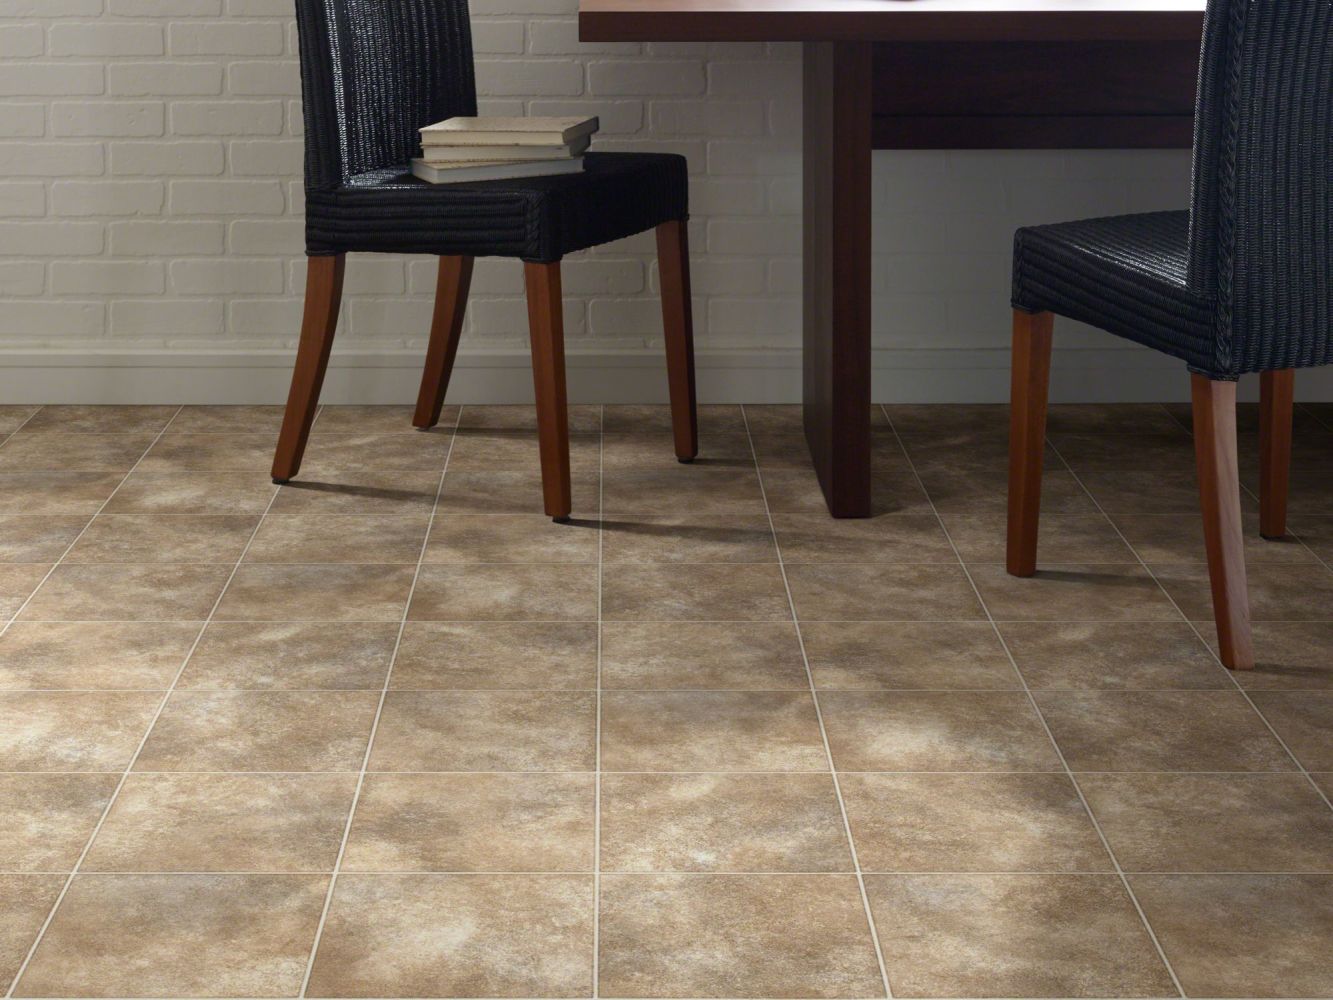 Shaw Floors Resilient Residential Coastal Classics Taupe 00738_0509V